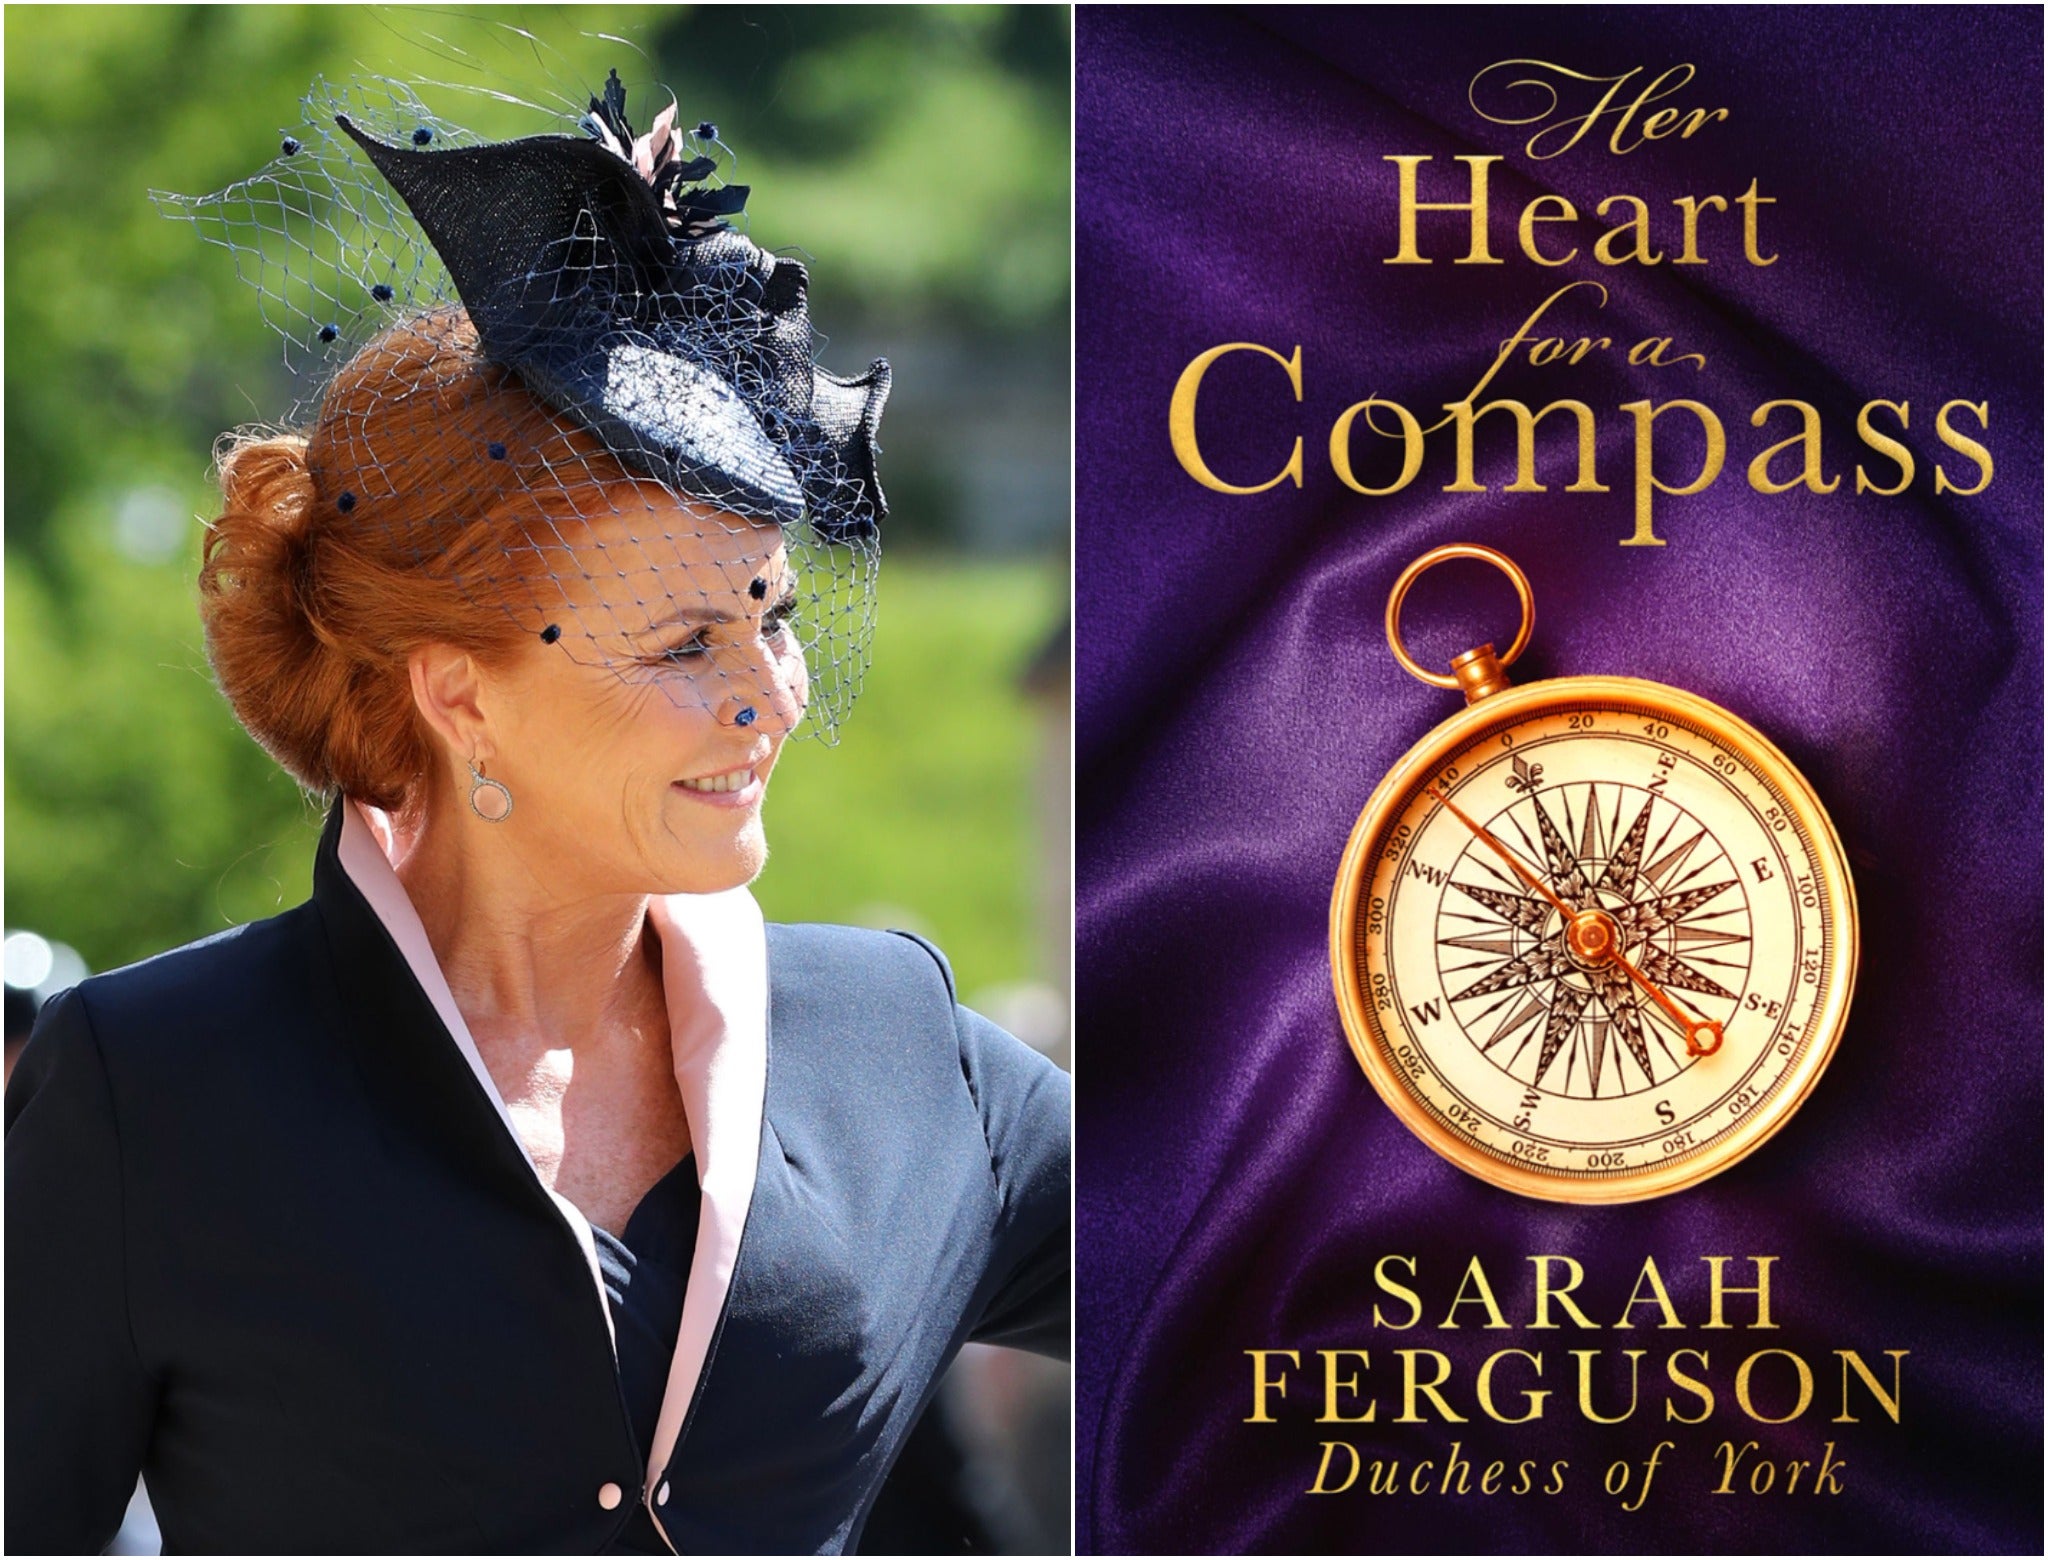 Sarah Ferguson makes her Mills & Boon debut with ‘Her Heart for a Compass'